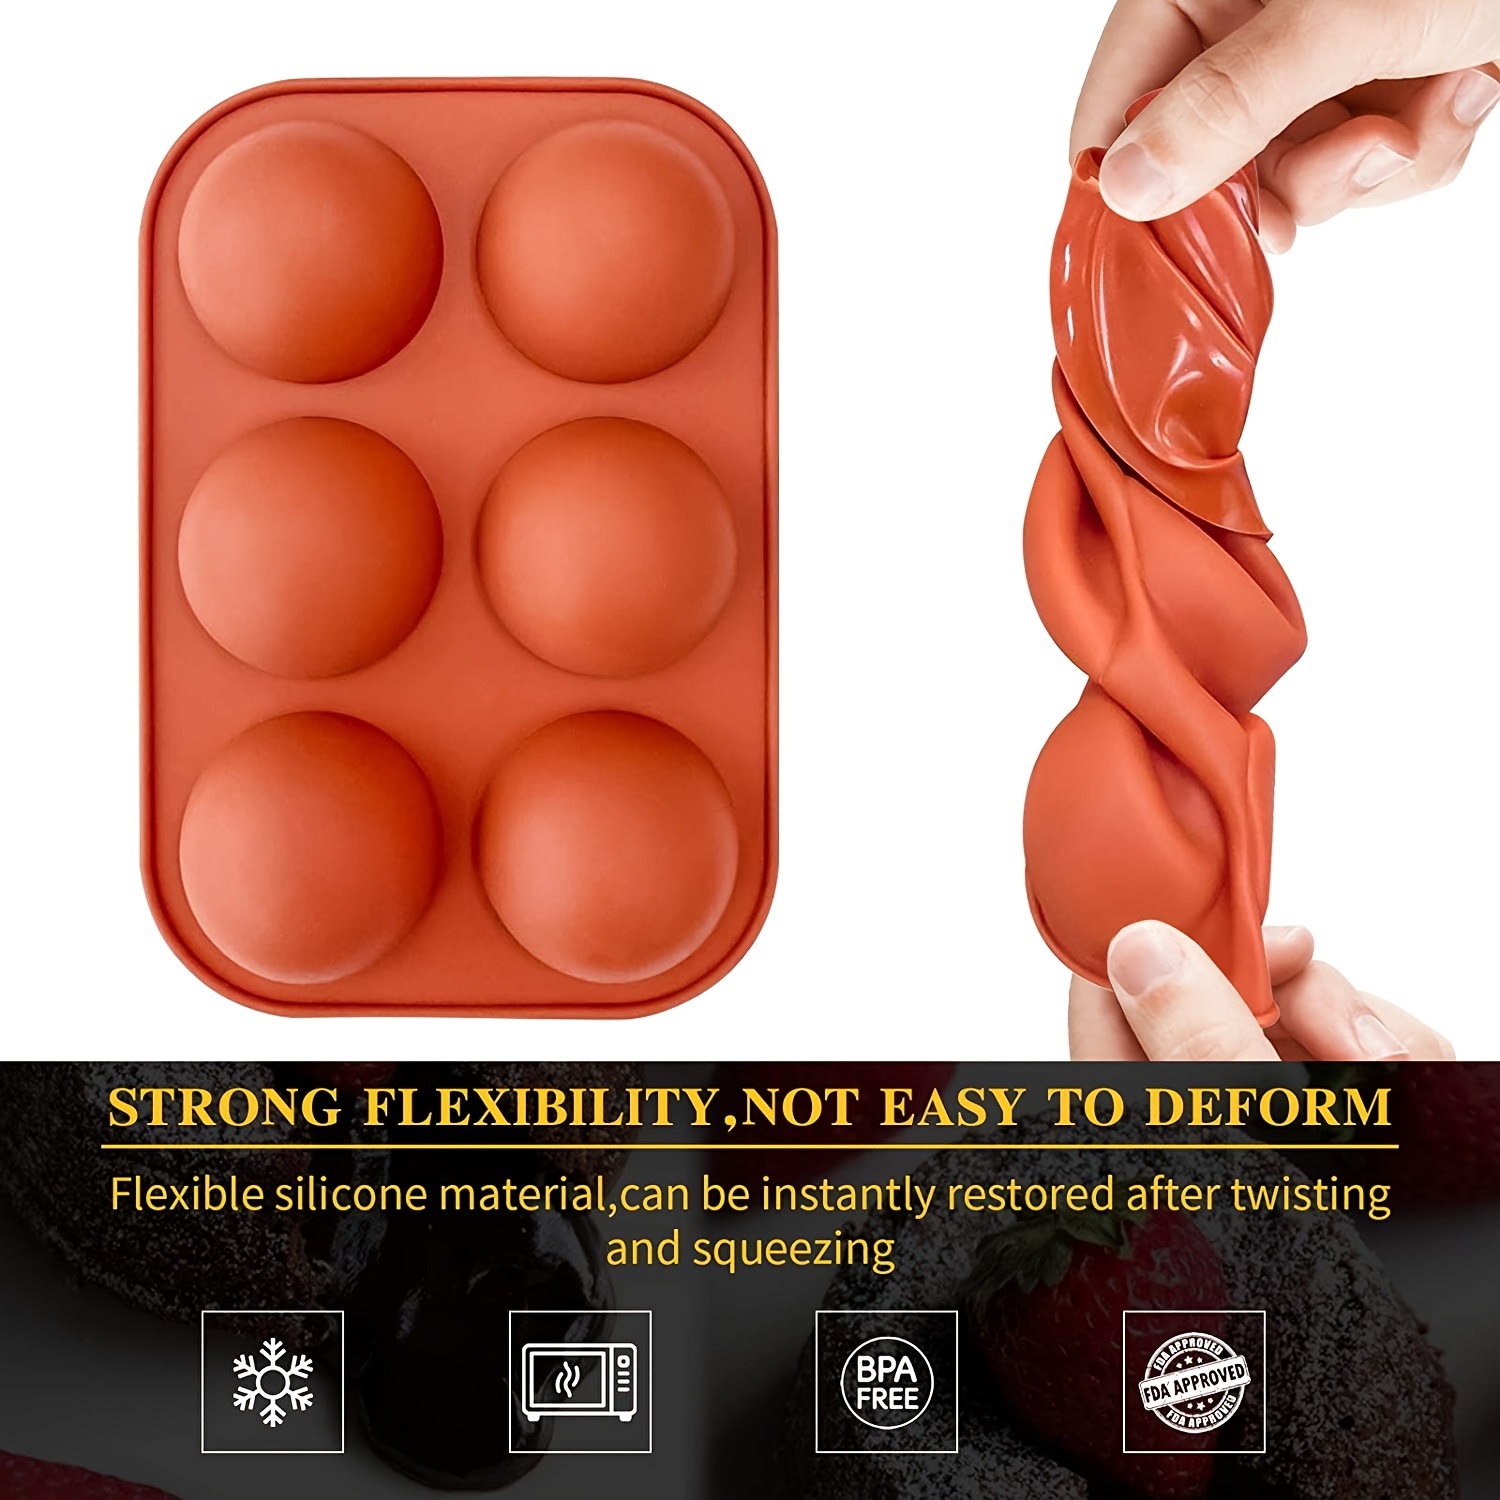 homEdge Mini 24-Cavity Semi Sphere Silicone Mold, 3 Packs Baking Mold for Making Chocolate, Cake, Jelly, Dome Mousse